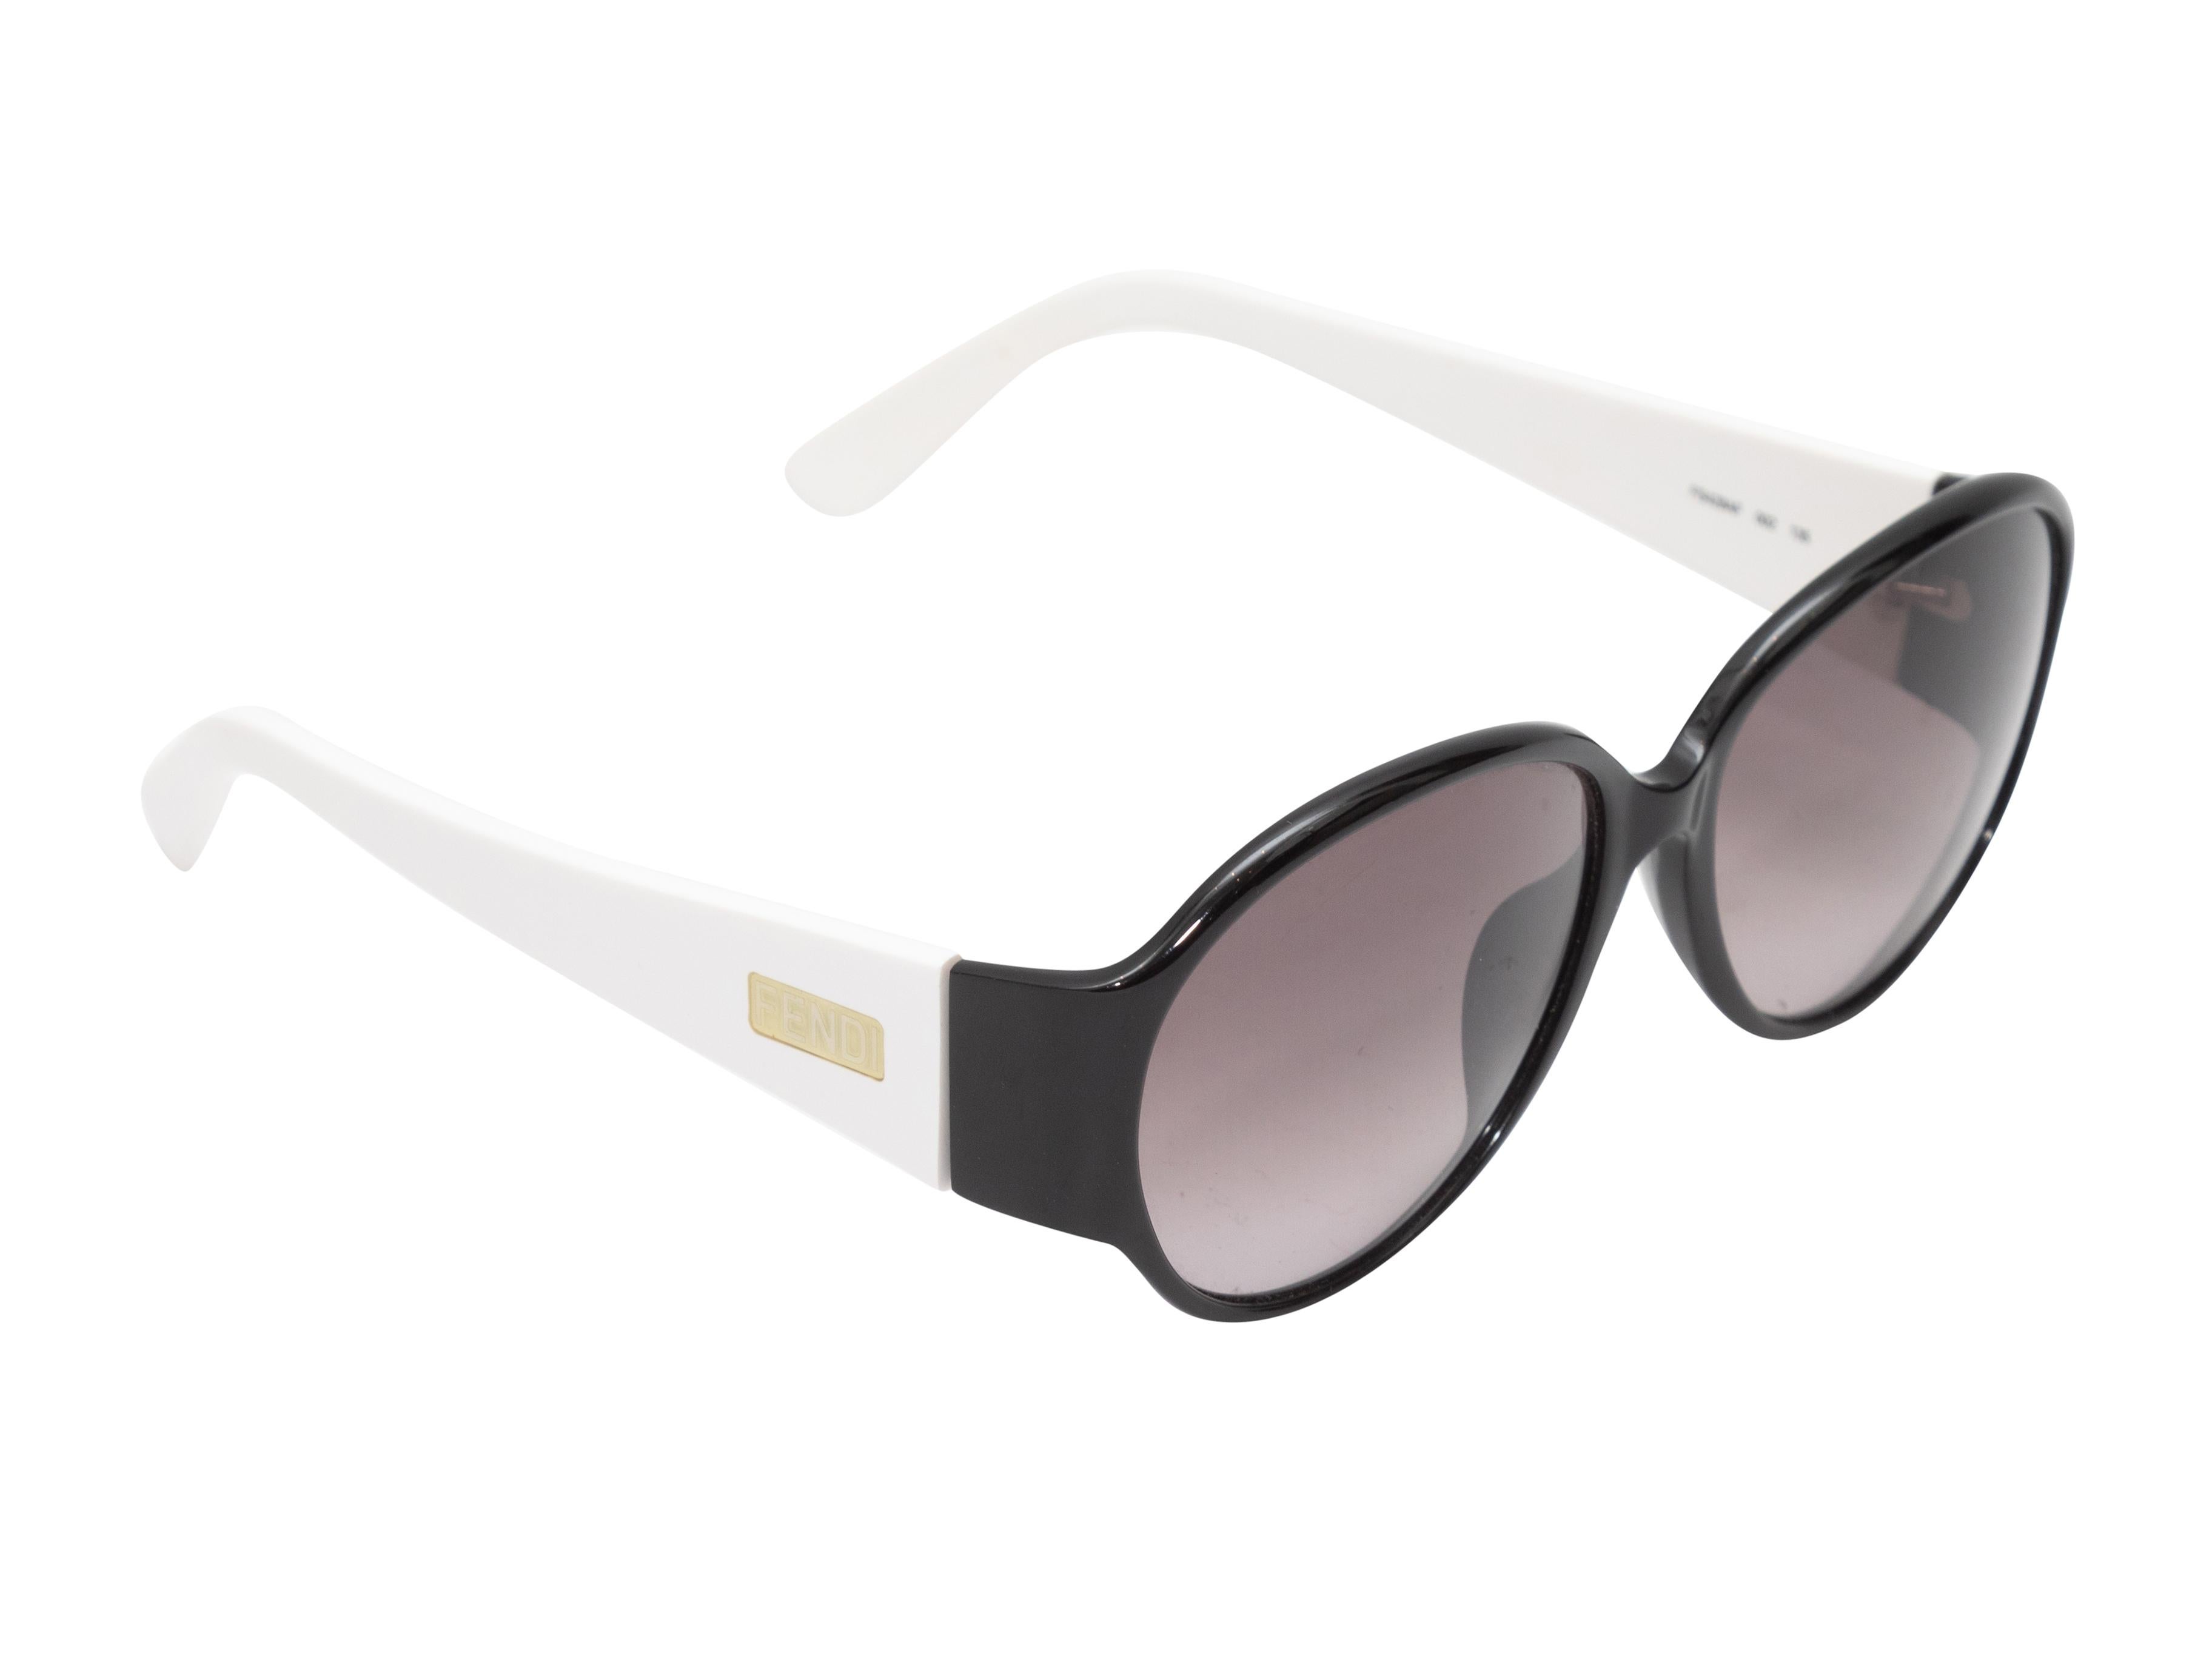 Black and white acetate sunglasses by Fendi. Grey tinted lenses. 2.25